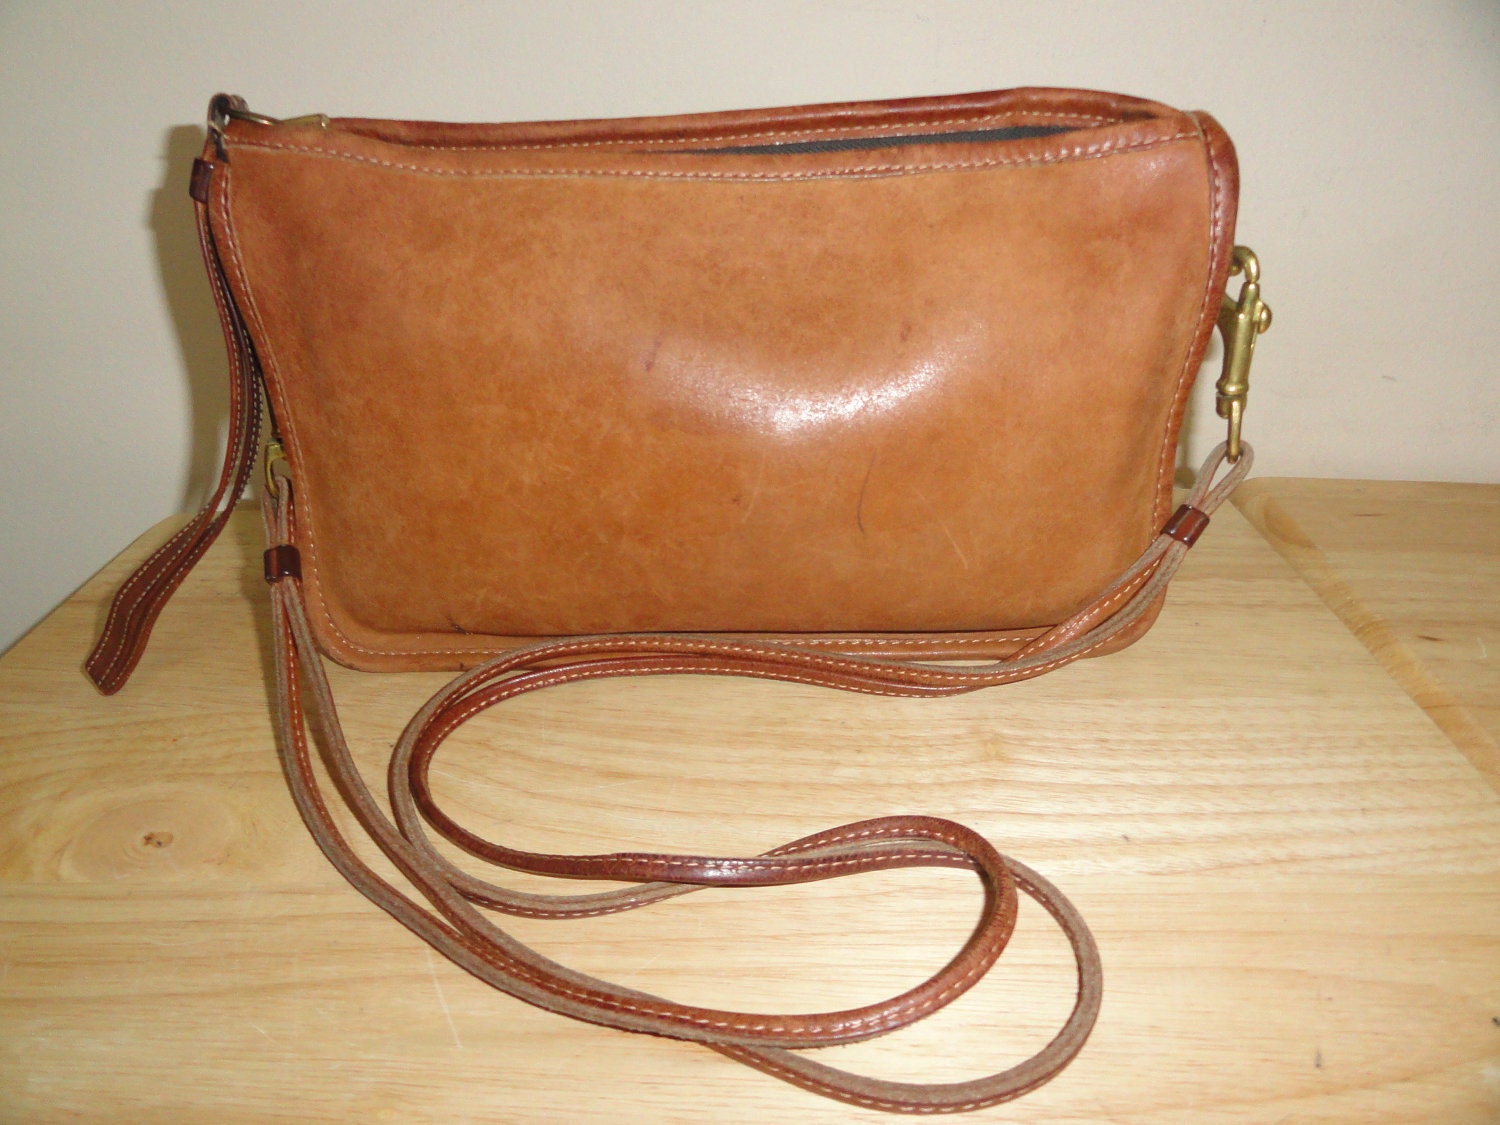 Vintage Tan Brown Leather Coach Clutch Bag No. 4408 Made by JP1977